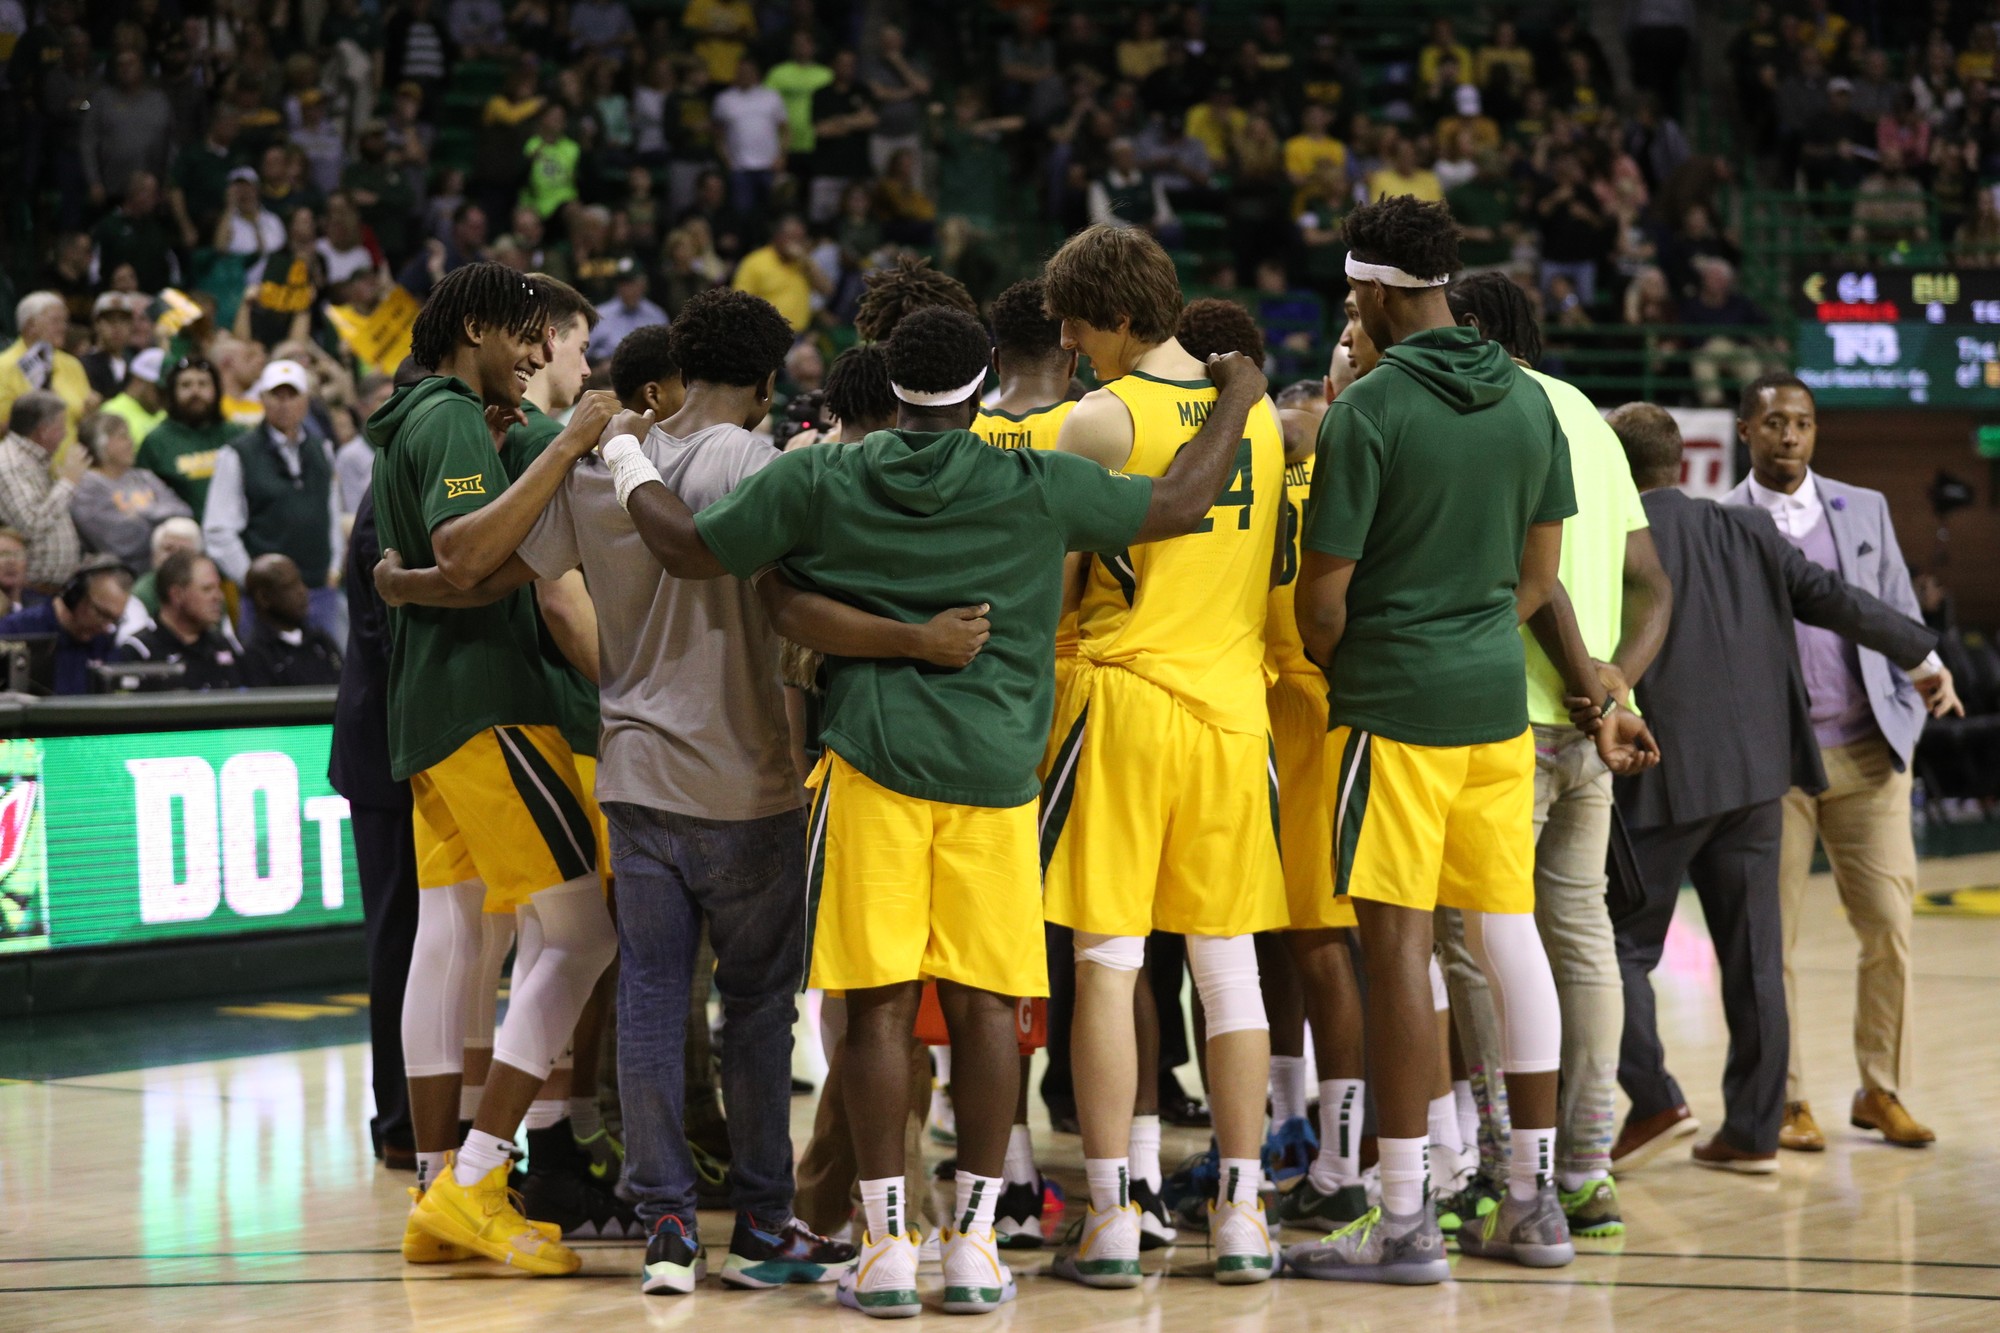 Redshirt transfers add depth to Baylor basketball during uncertain